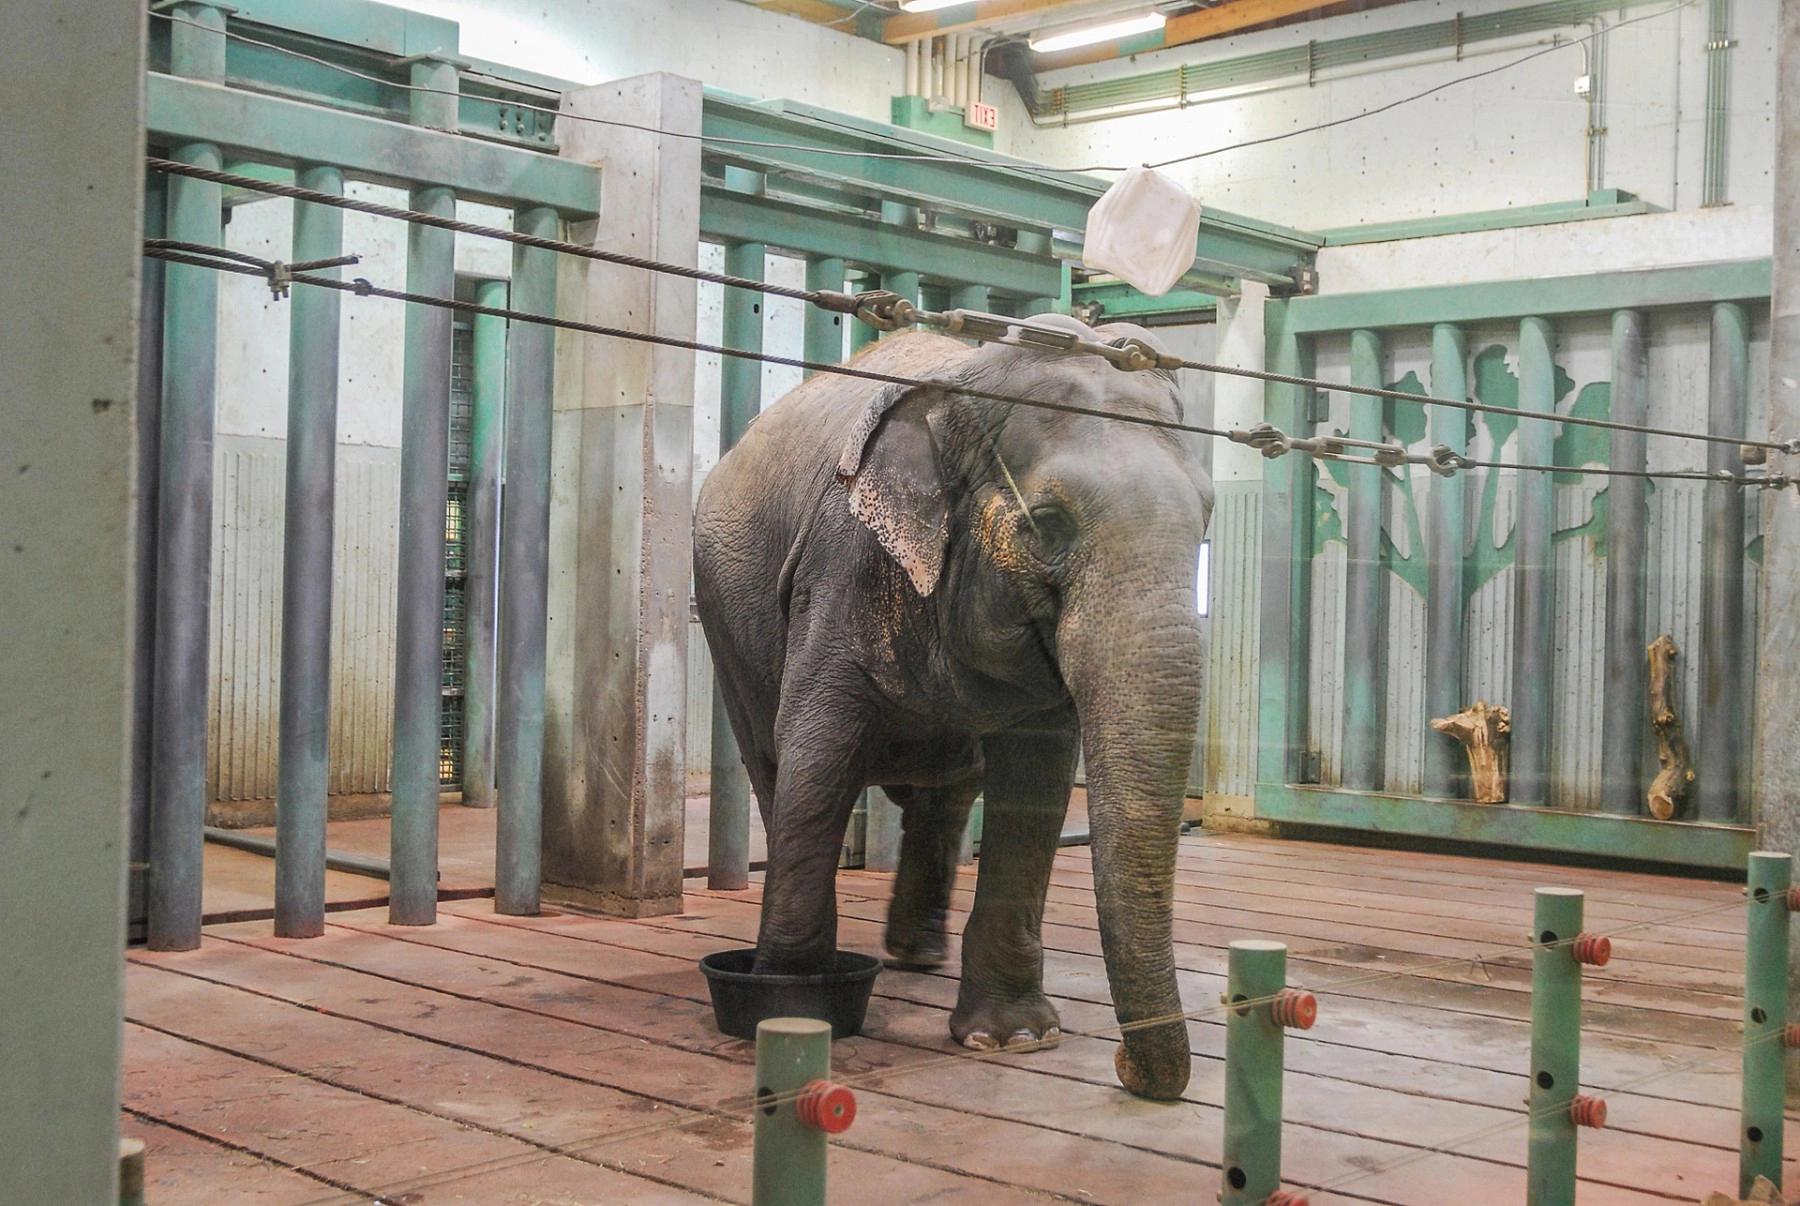 Pictured: Lucy the elephant has spent most of her life living alone at the Edmonton Valley Zoo in Alberta, Canada